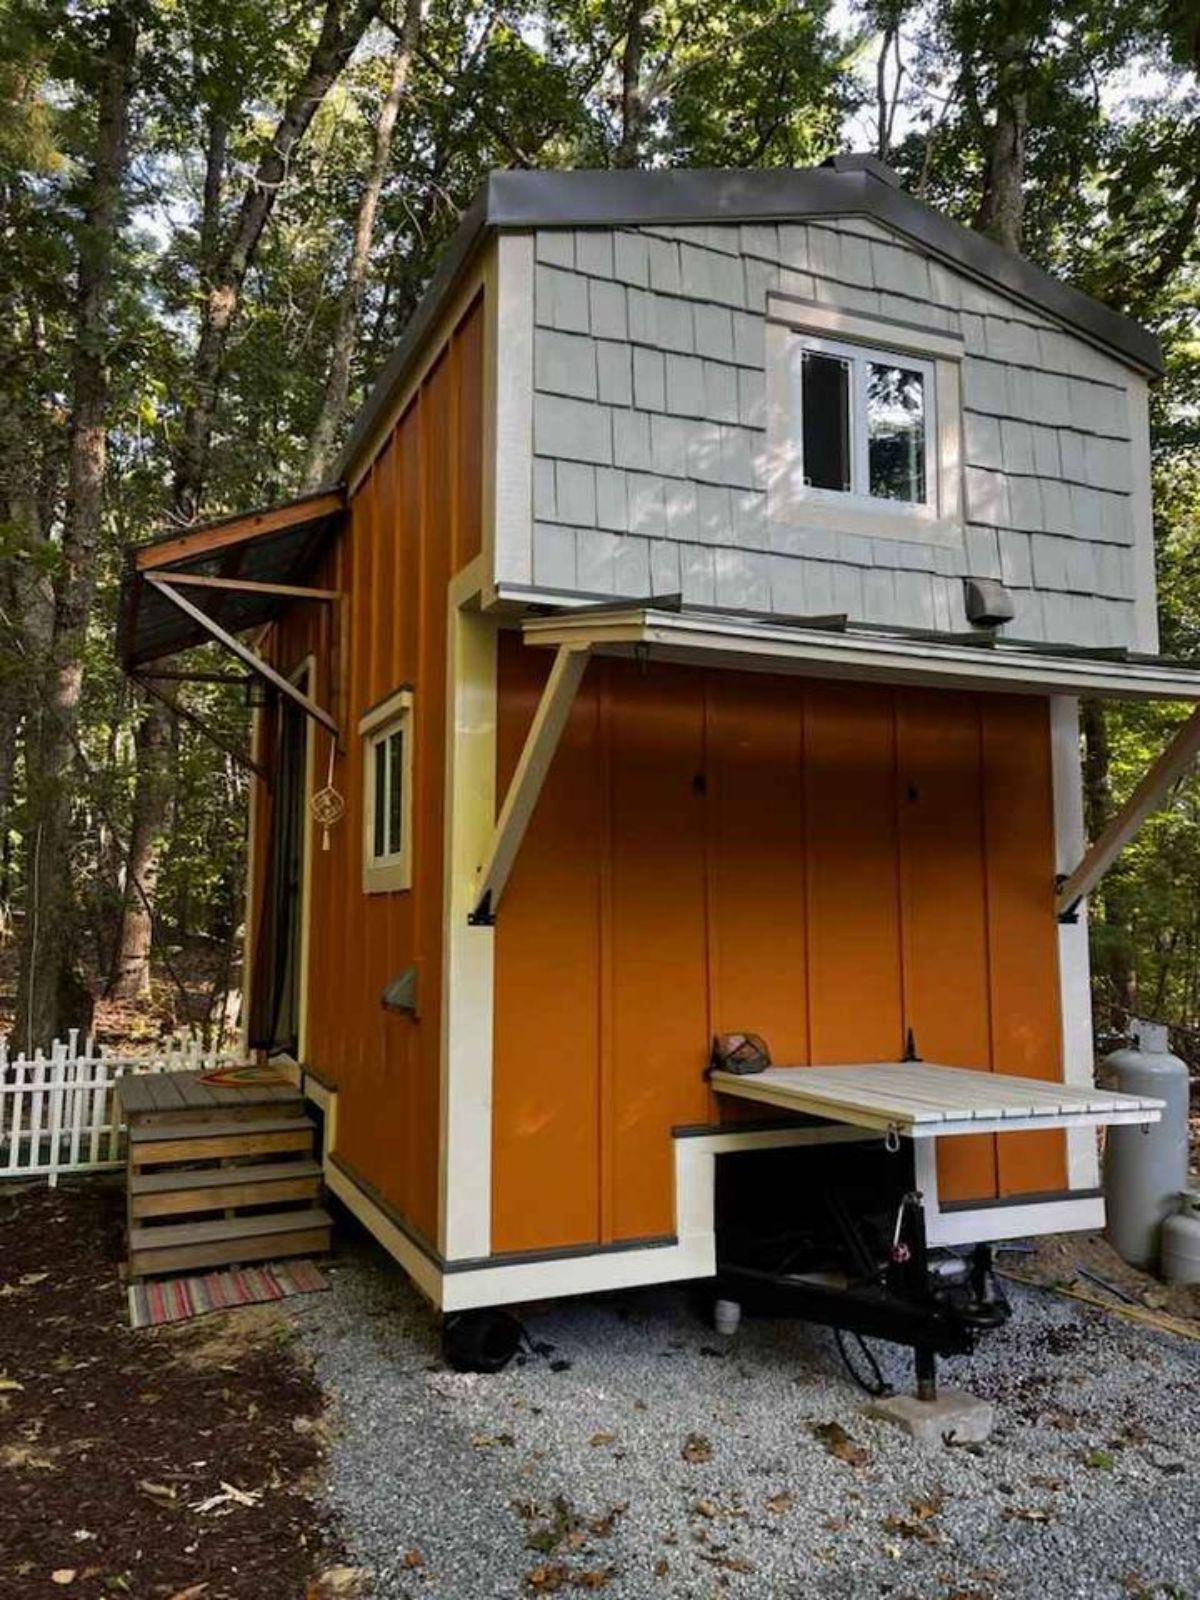 Stunning exterior of 20' two bedroom tiny house from backside